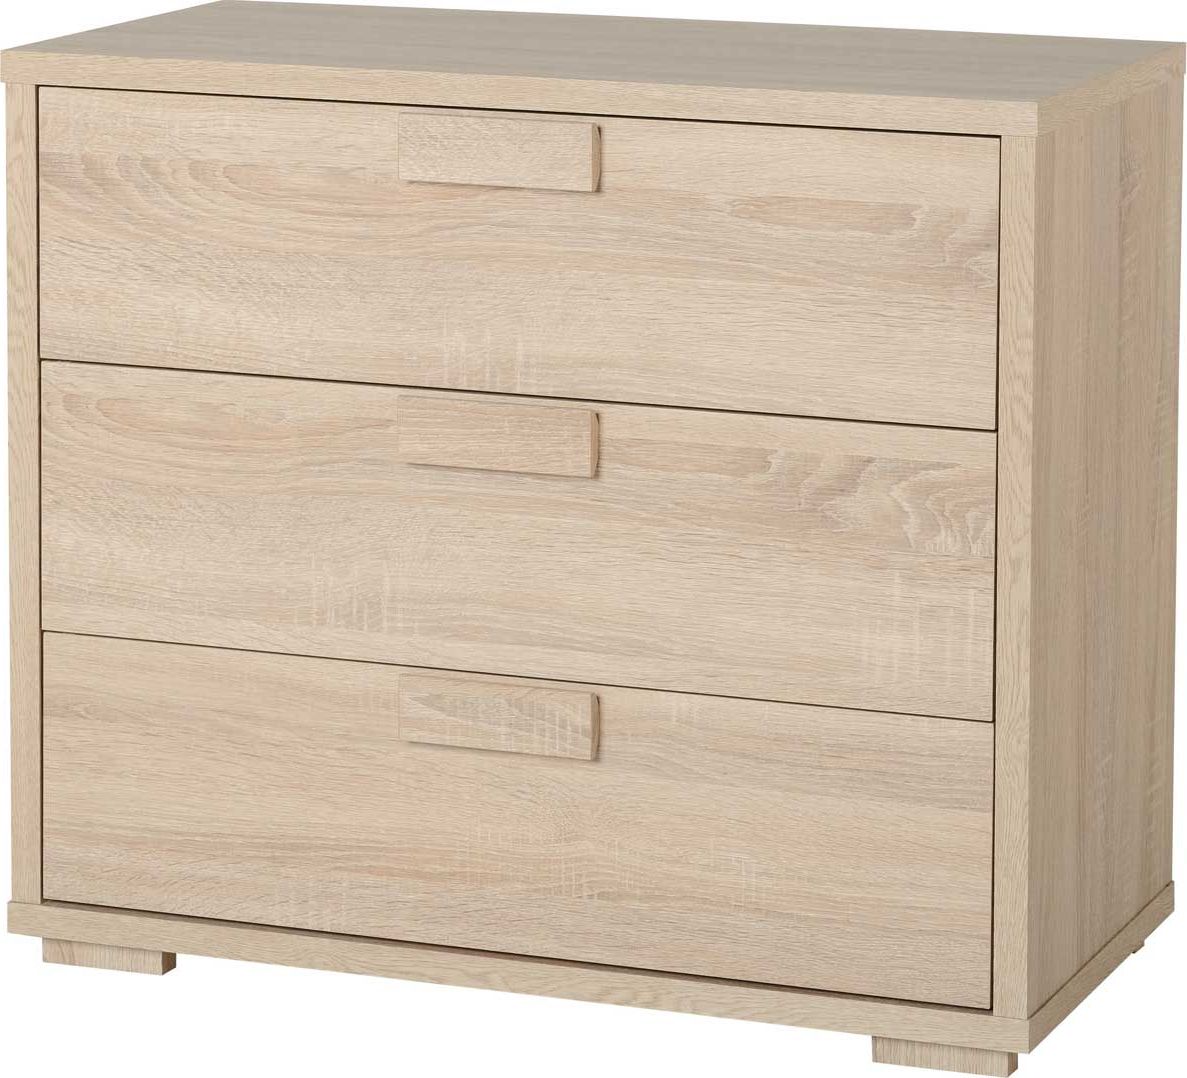 Most Recent Cambourne Tv Stands Regarding Seconique Cambourne 3 Drawer Chest Sonoma Oak Effect (View 7 of 10)